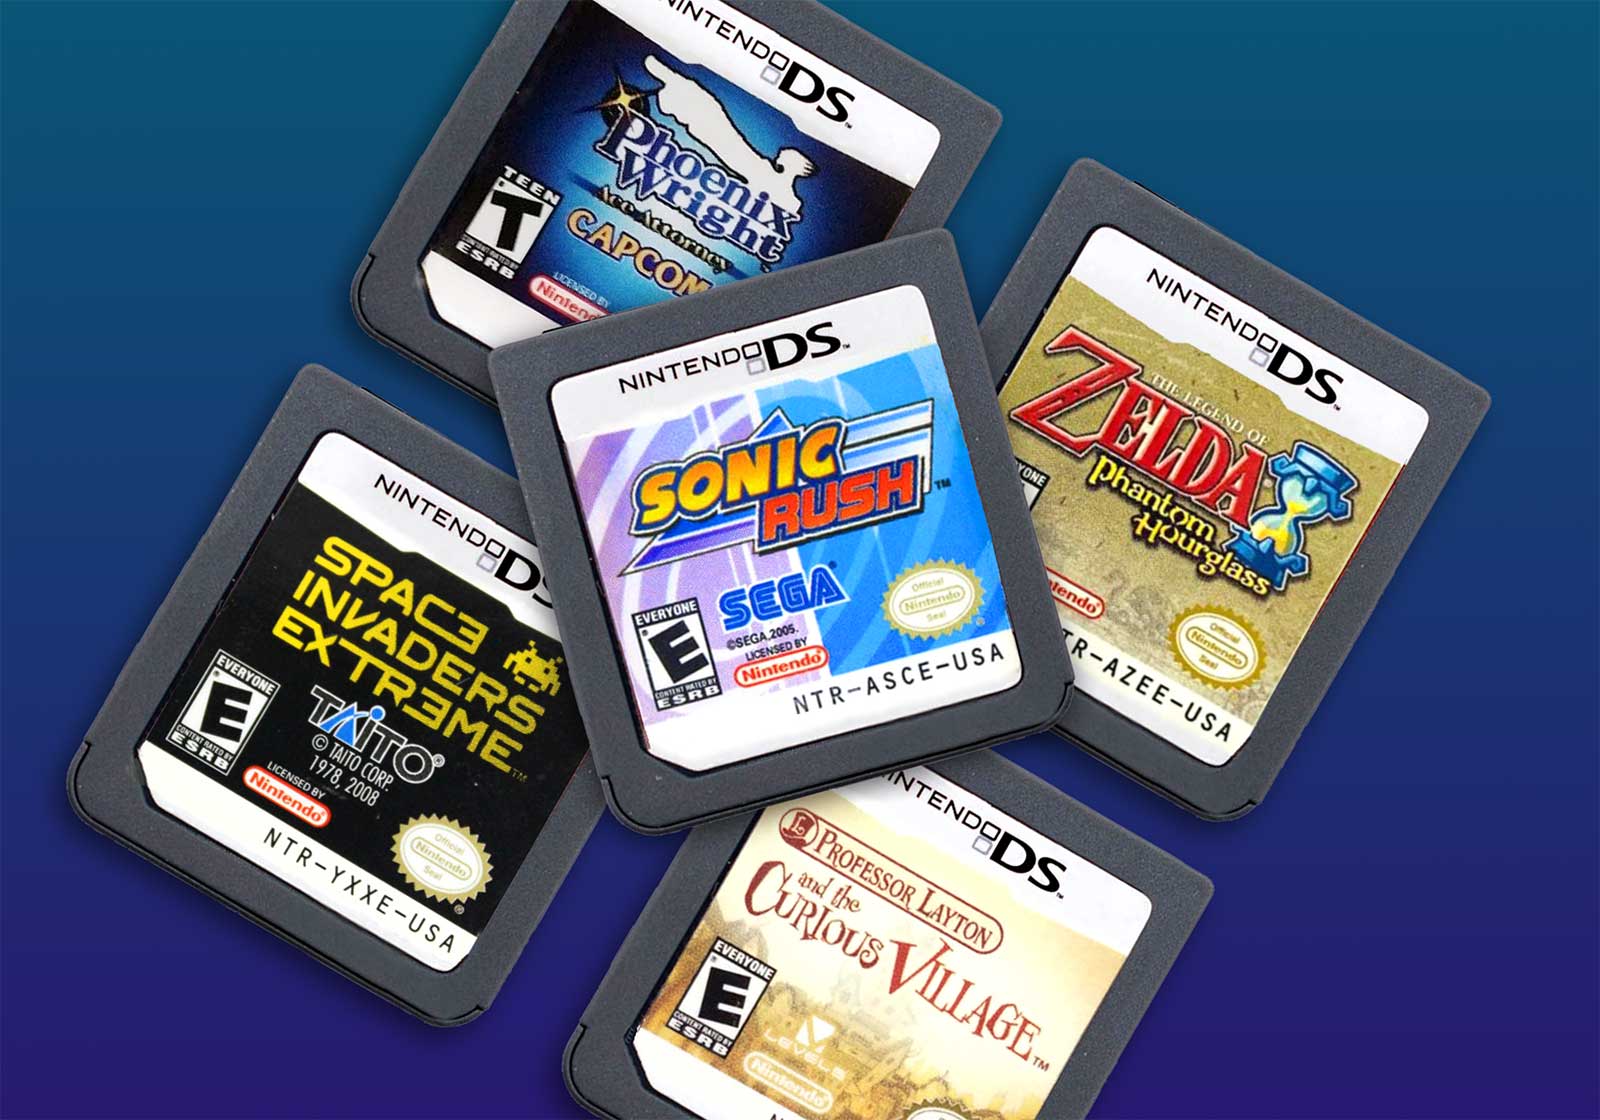 Clubhouse Games Nintendo DS Used